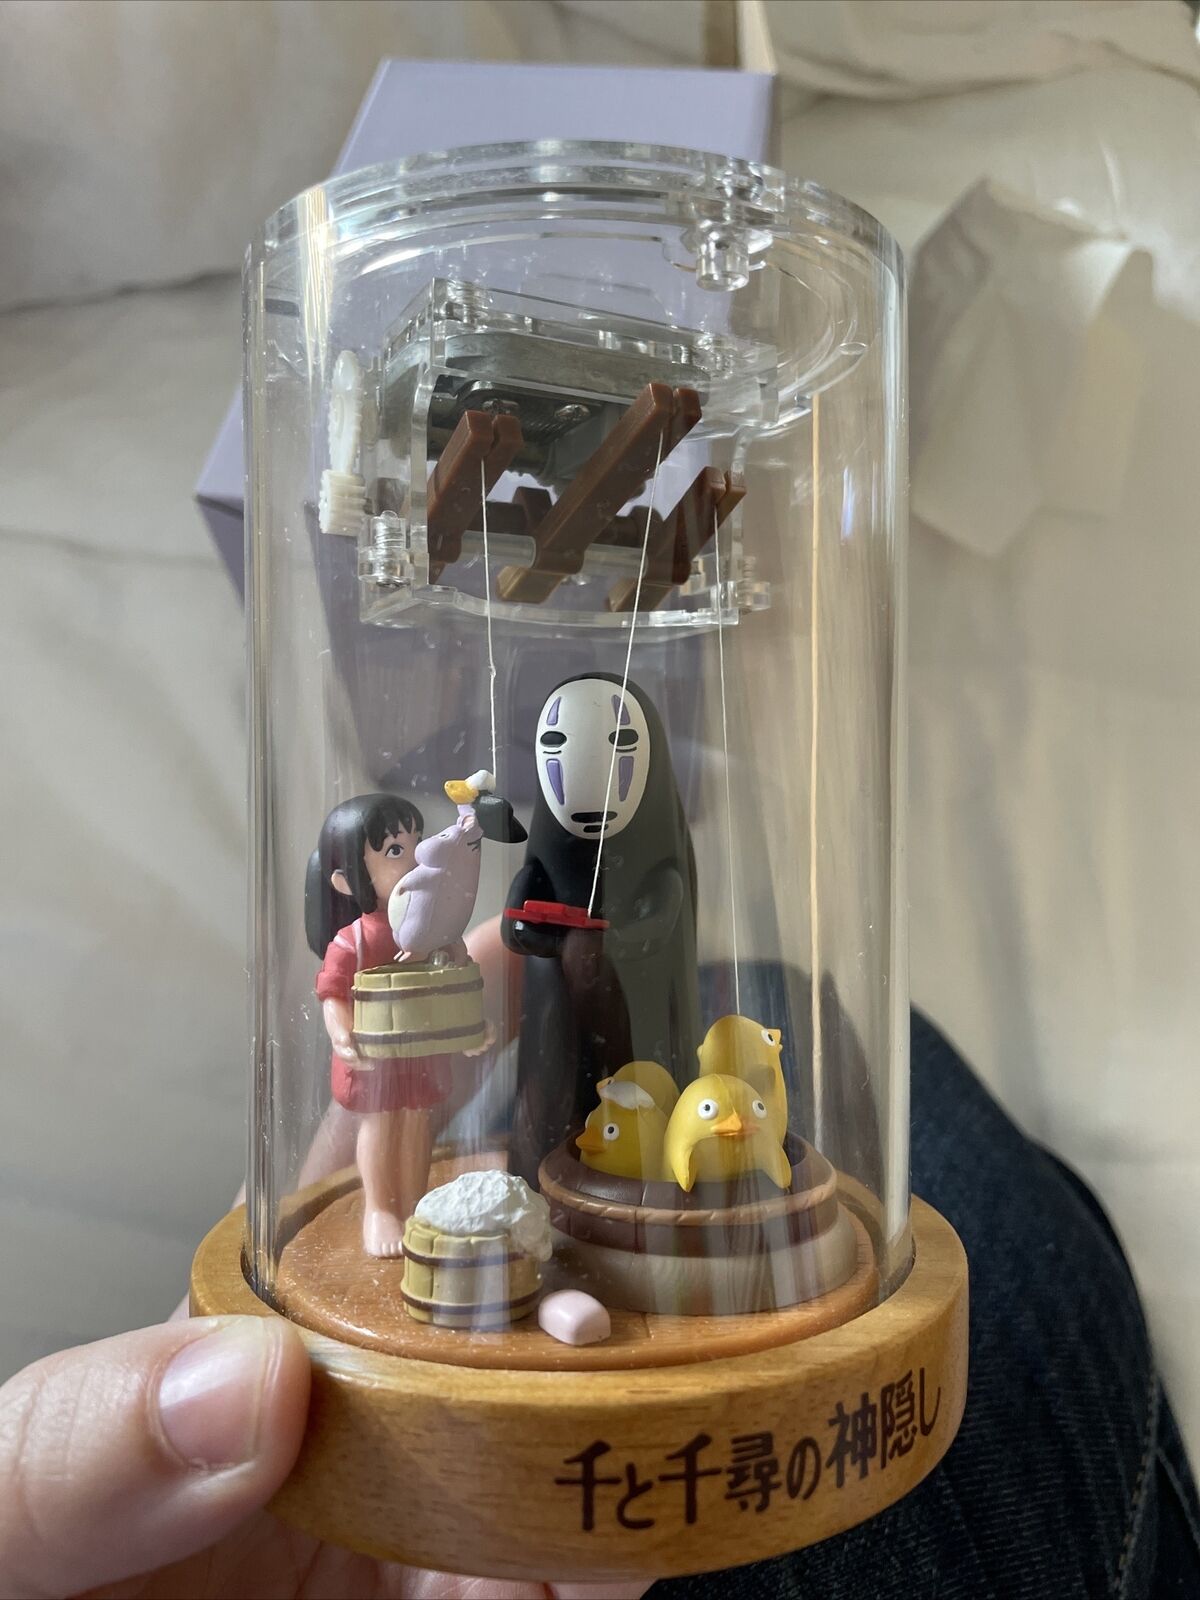 Studio Ghibli Spirited Away Puppet Music Box height of about 13.5cm